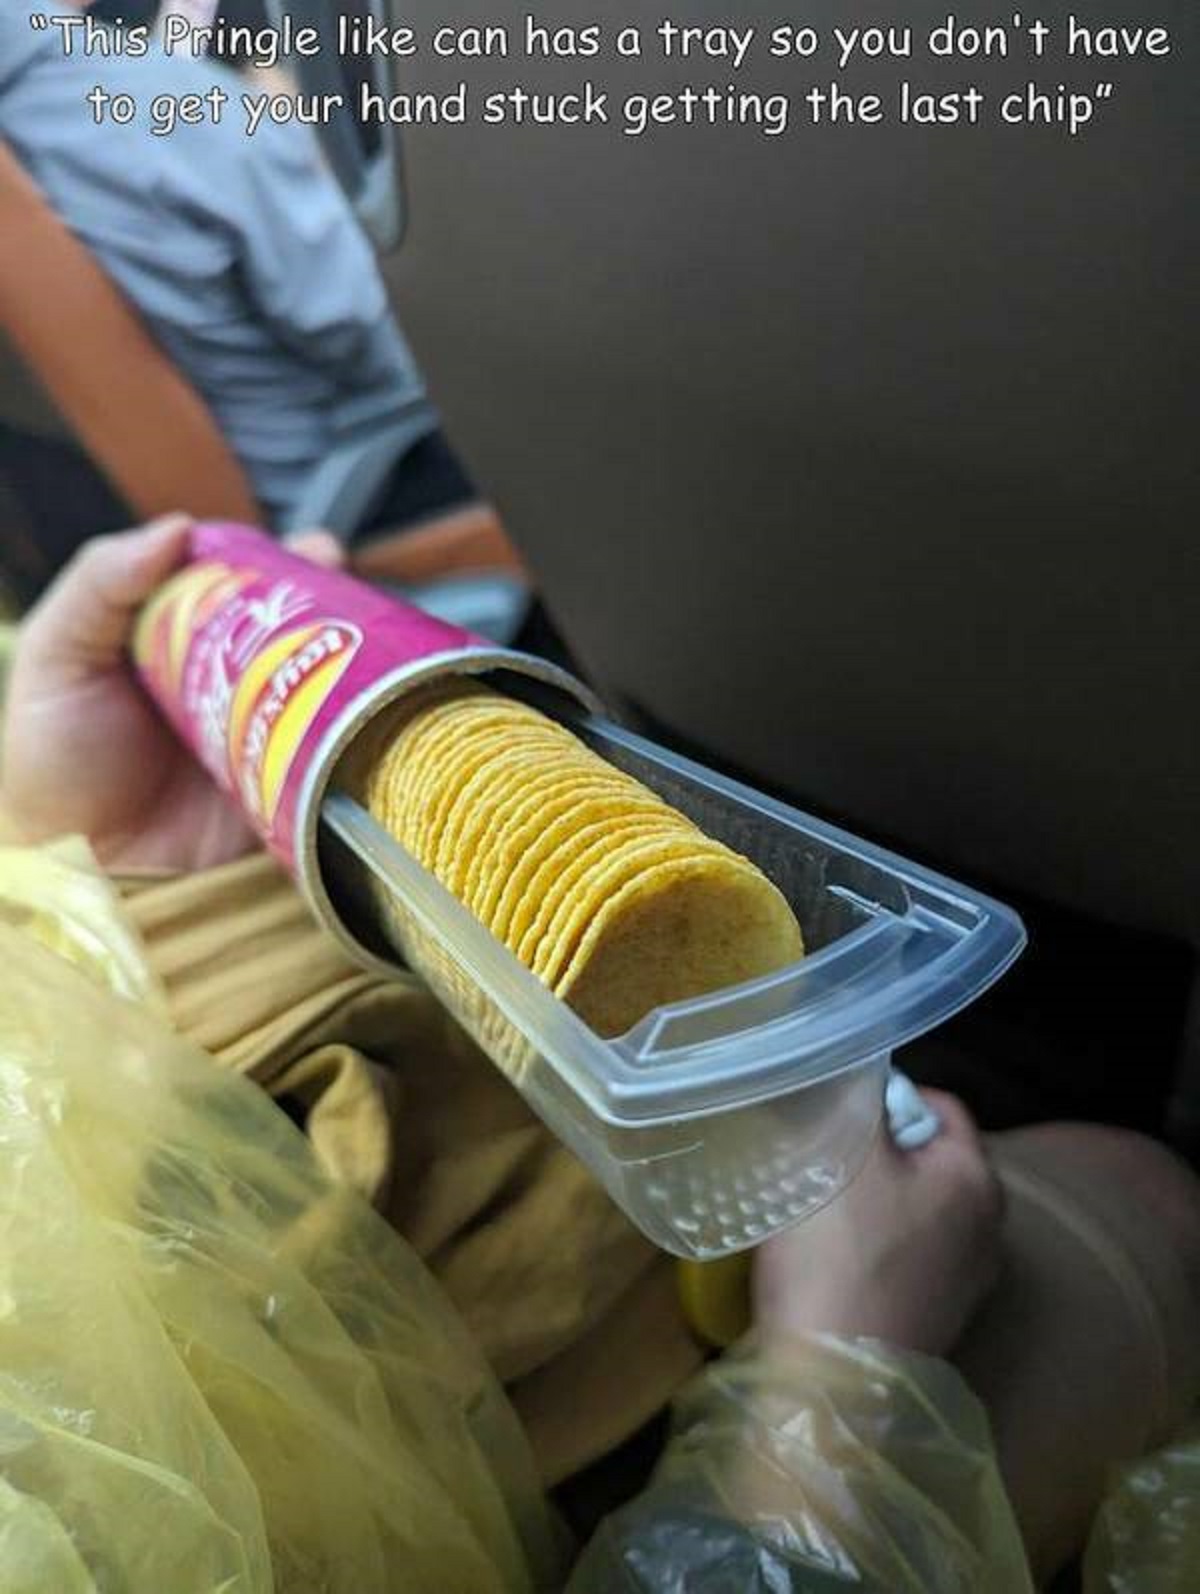 pringles tray - "This Pringle can has a tray so you don't have to get your hand stuck getting the last chip"